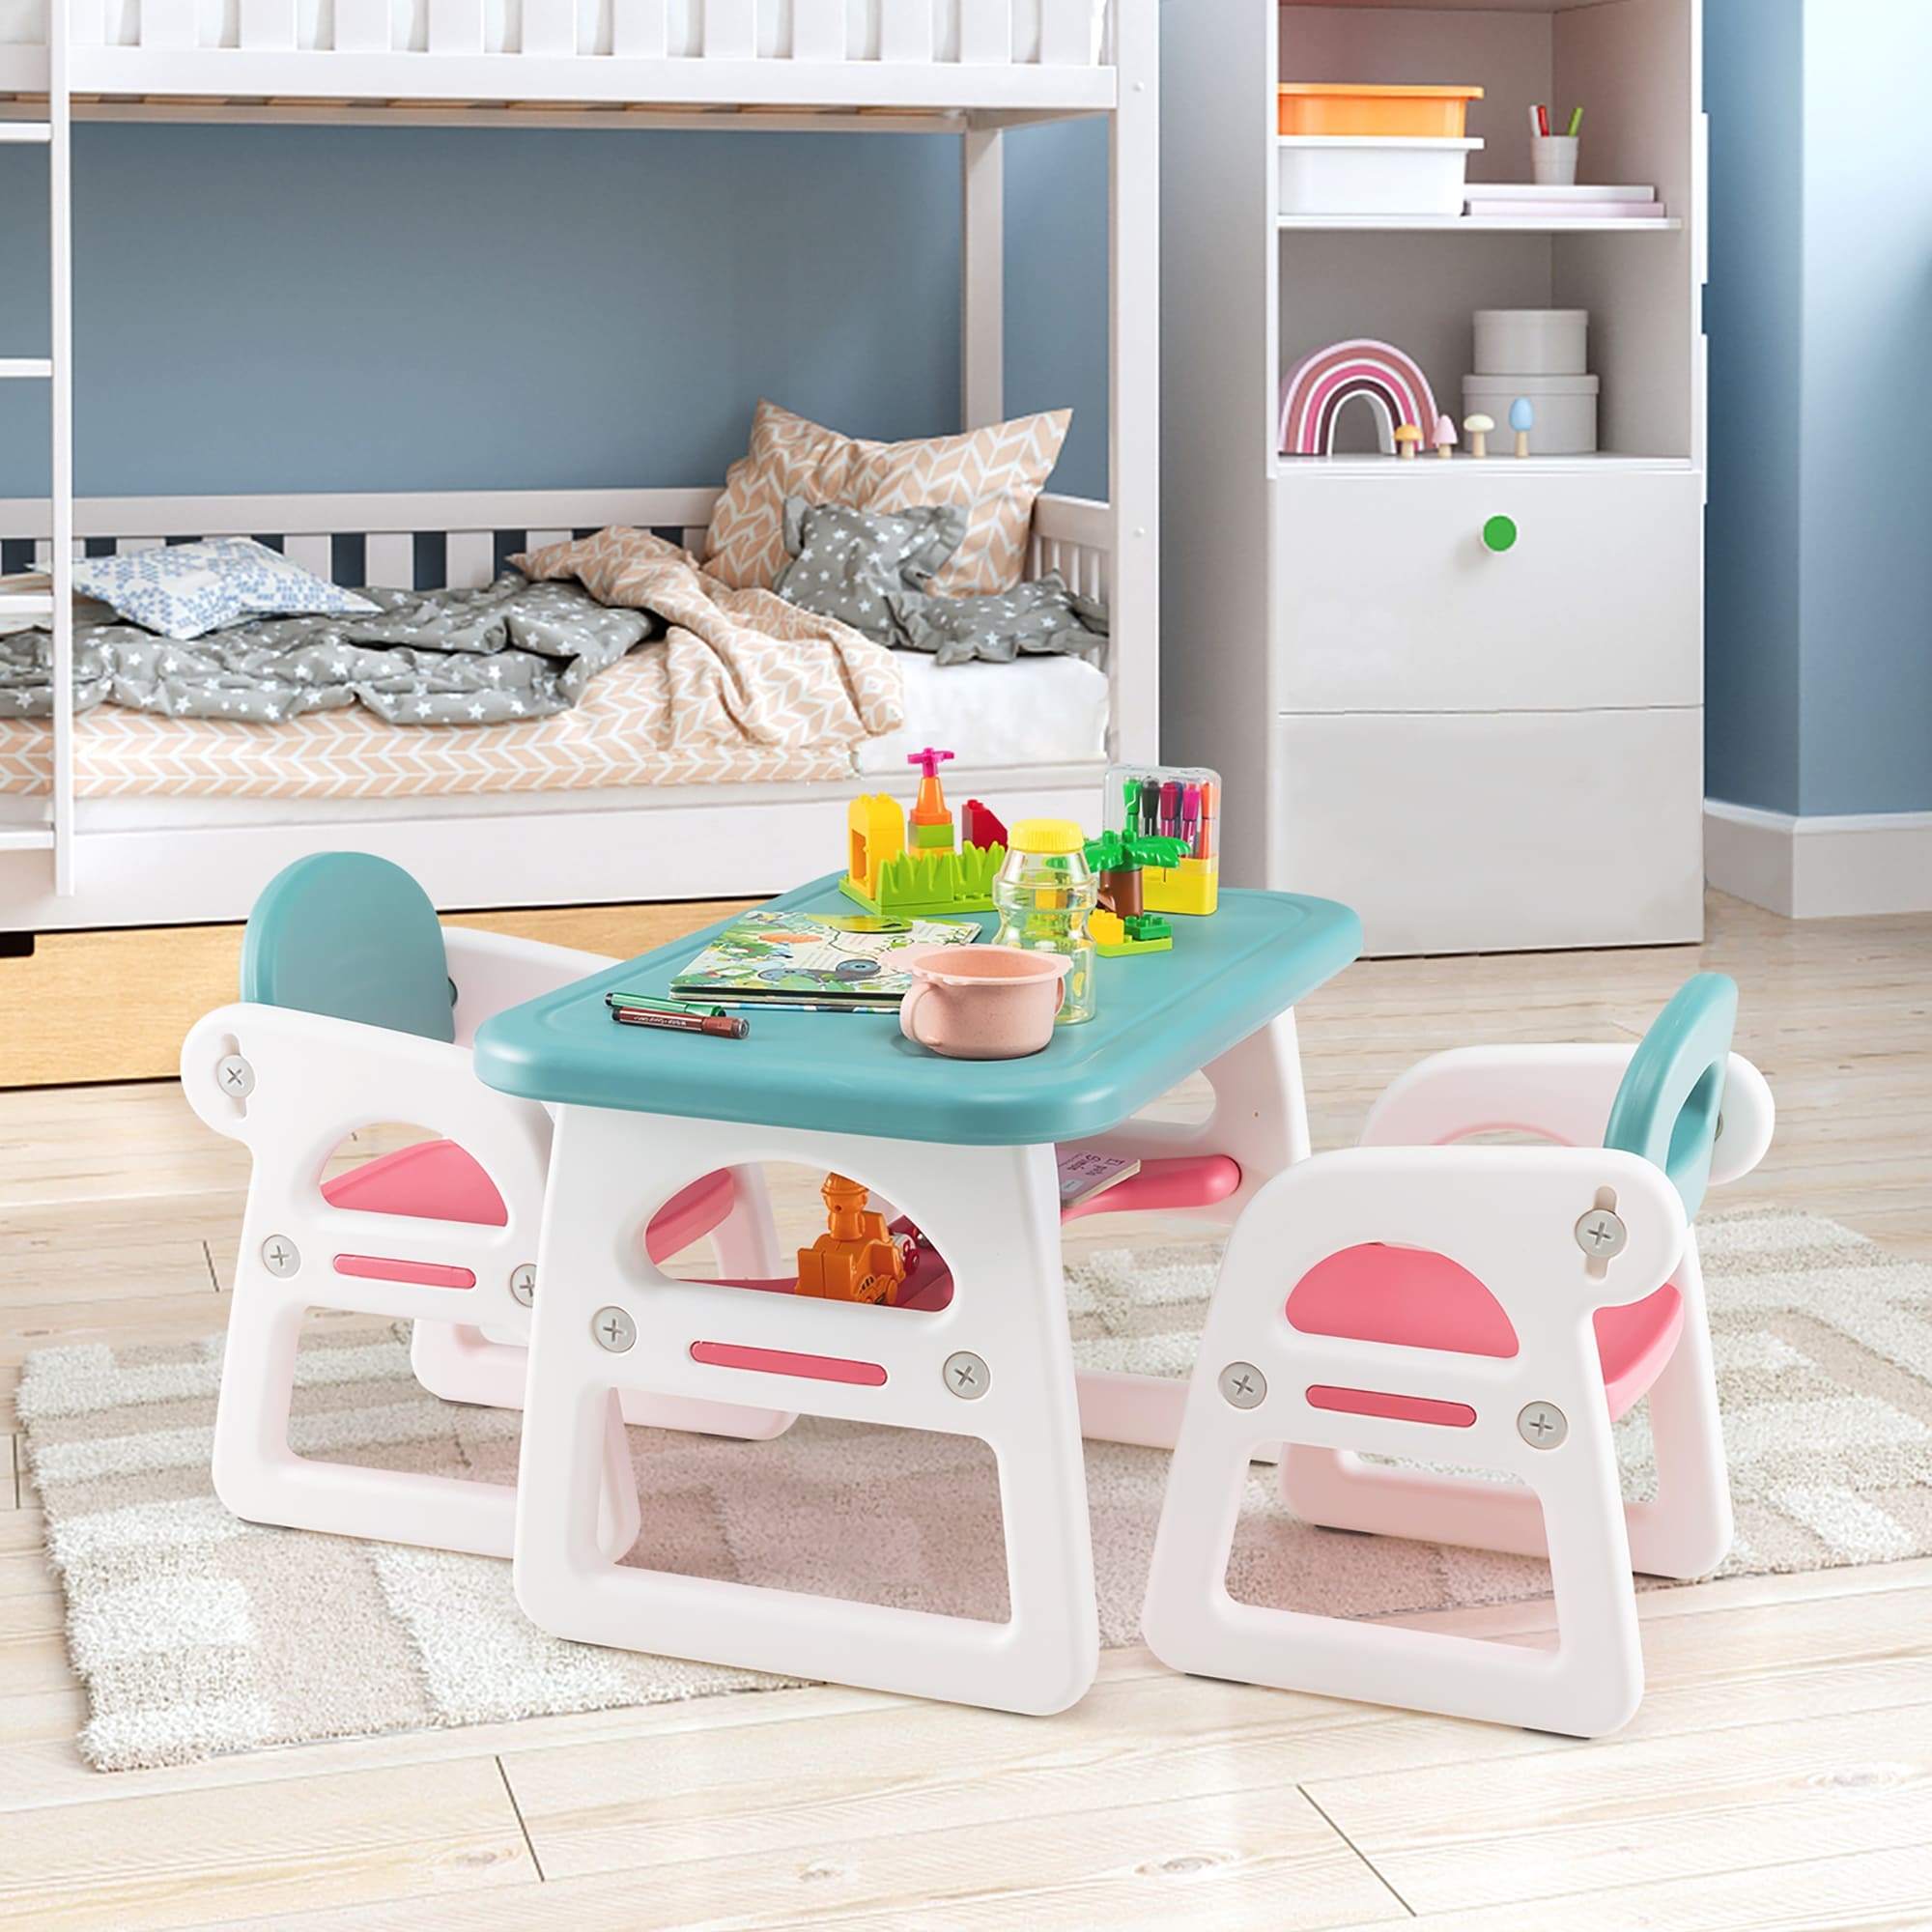 https://ak1.ostkcdn.com/images/products/is/images/direct/244715ece13bc808e4afeab34700bcb1d882b8d6/3PCS-Kids-Table-and-Chair-Set-Toddler-Activity-Desk-w--Building-Blocks.jpg